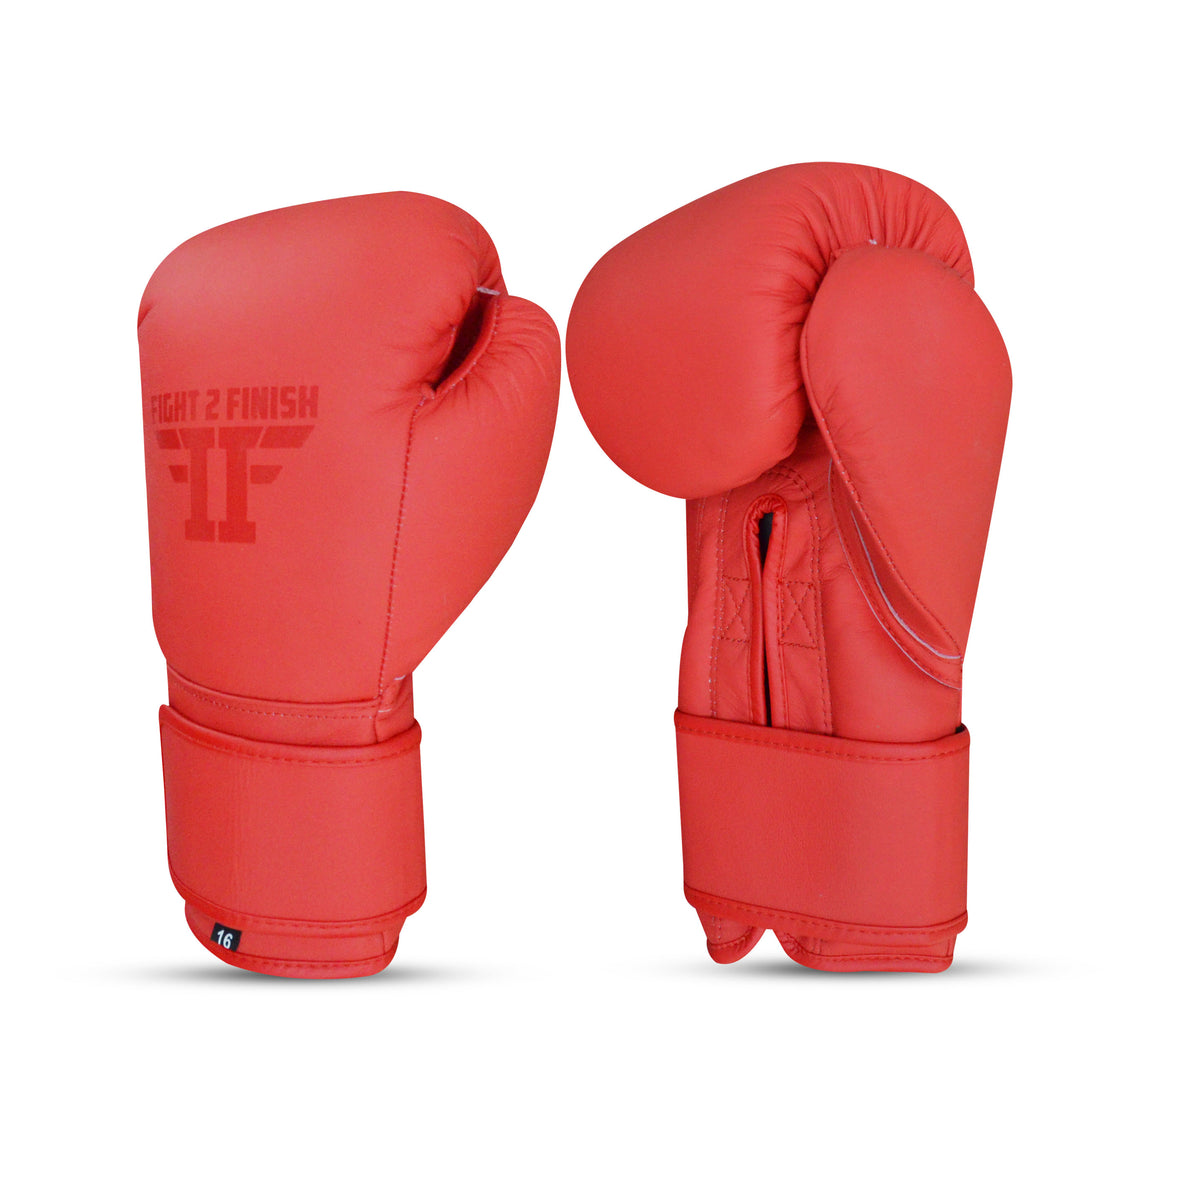 FIGHT 2 FINISH ELITE 2.0 TRAINING GLOVE RED/RED